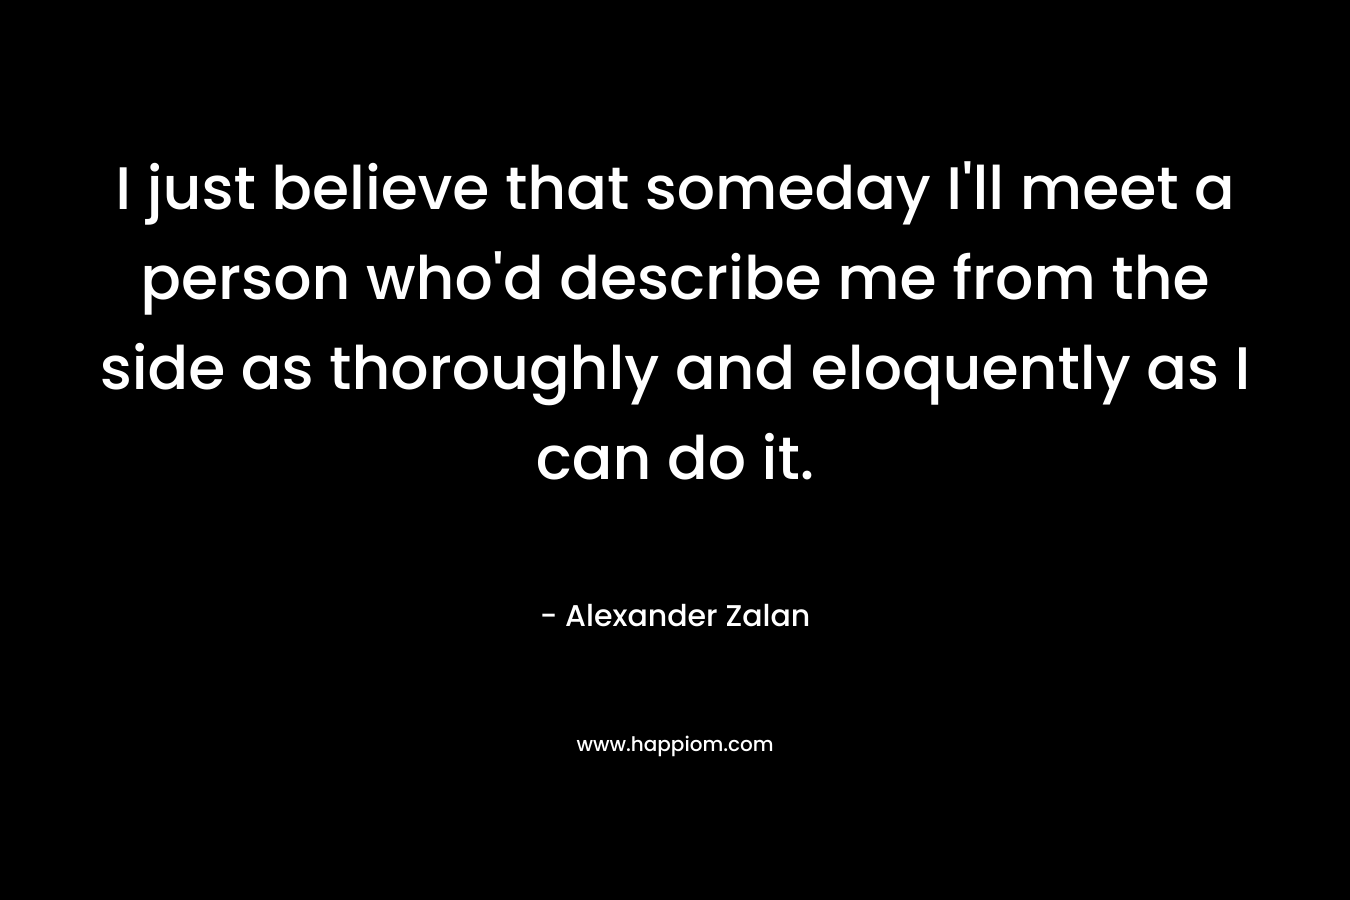 I just believe that someday I’ll meet a person who’d describe me from the side as thoroughly and eloquently as I can do it. – Alexander Zalan